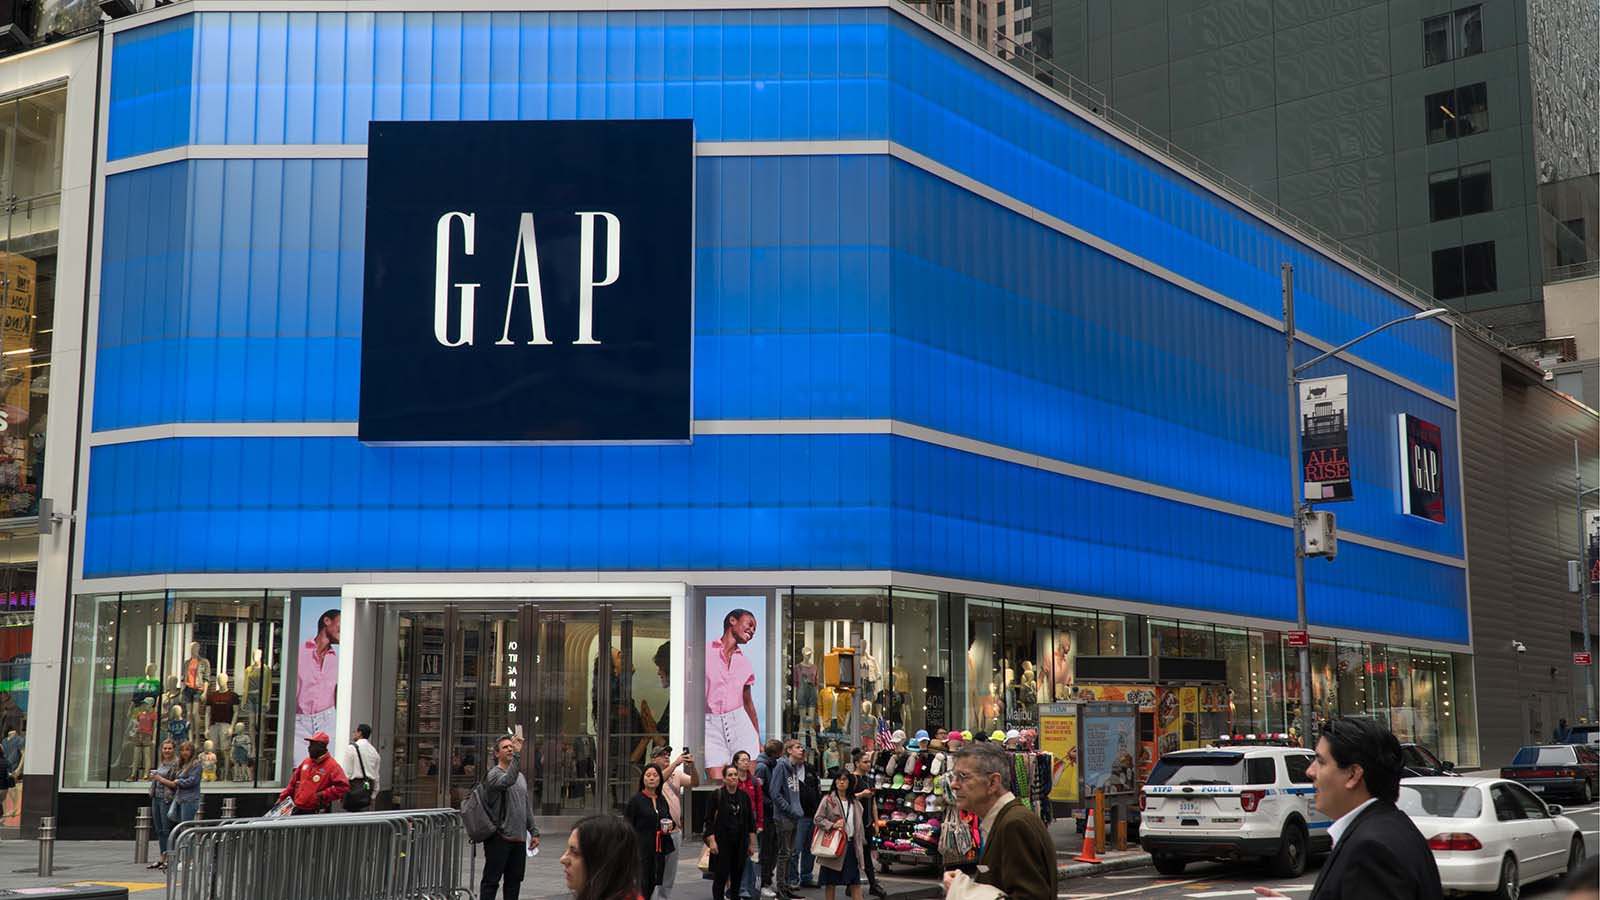 Gap Isn’t an AI Stock, But It Has Years of Upside Surprises Ahead